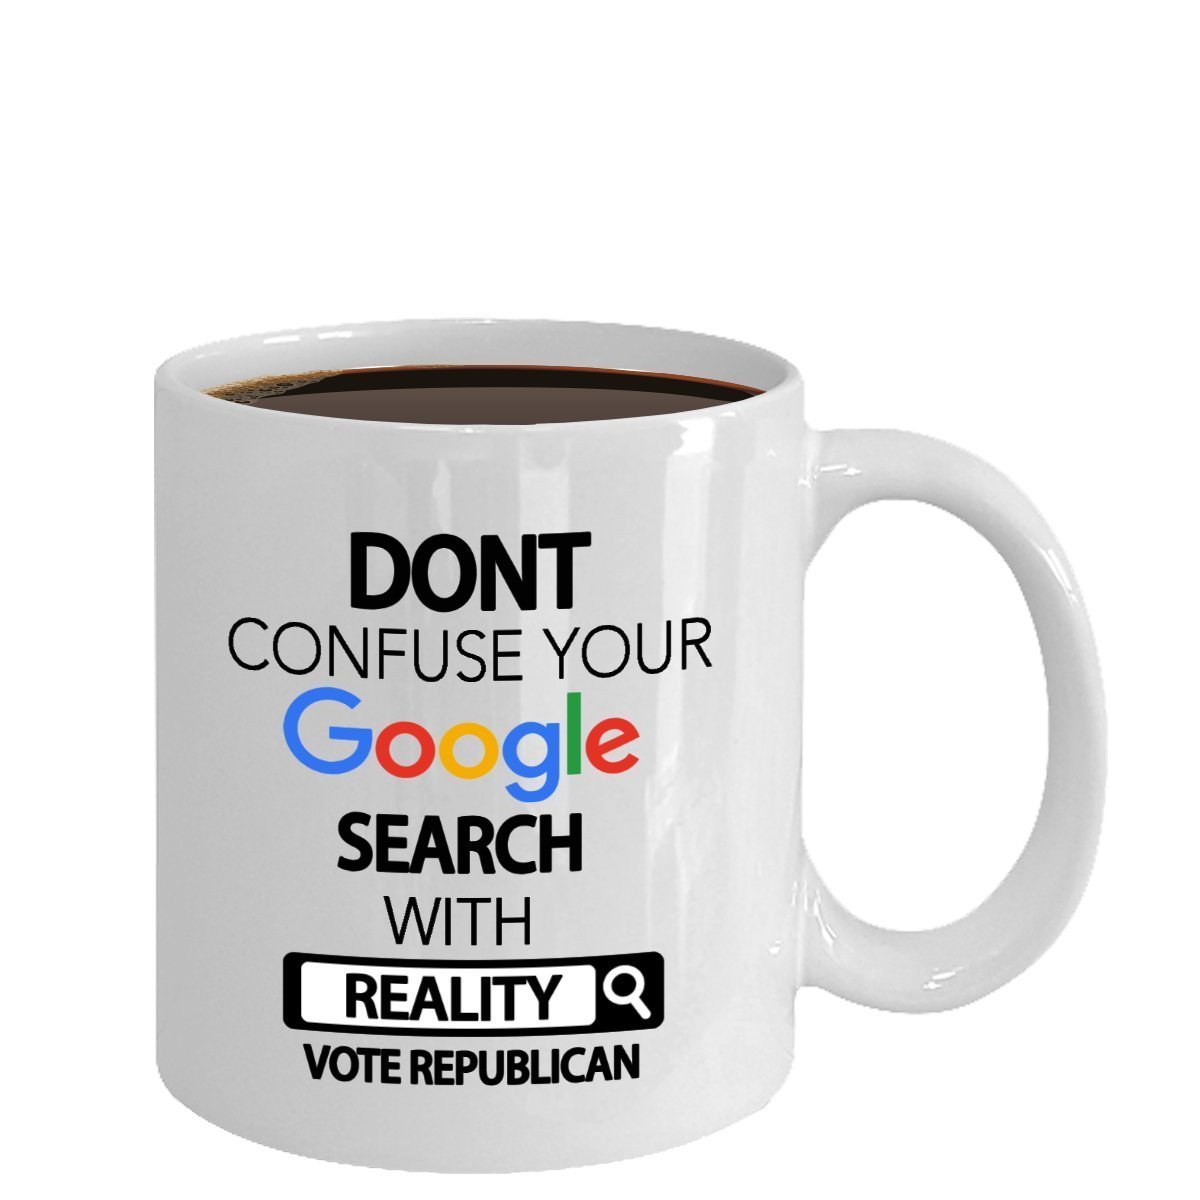 Republican Mug - Vote Republican - Don't Confuse Your Google Search With Reality Vote Republican - Republican Gifts